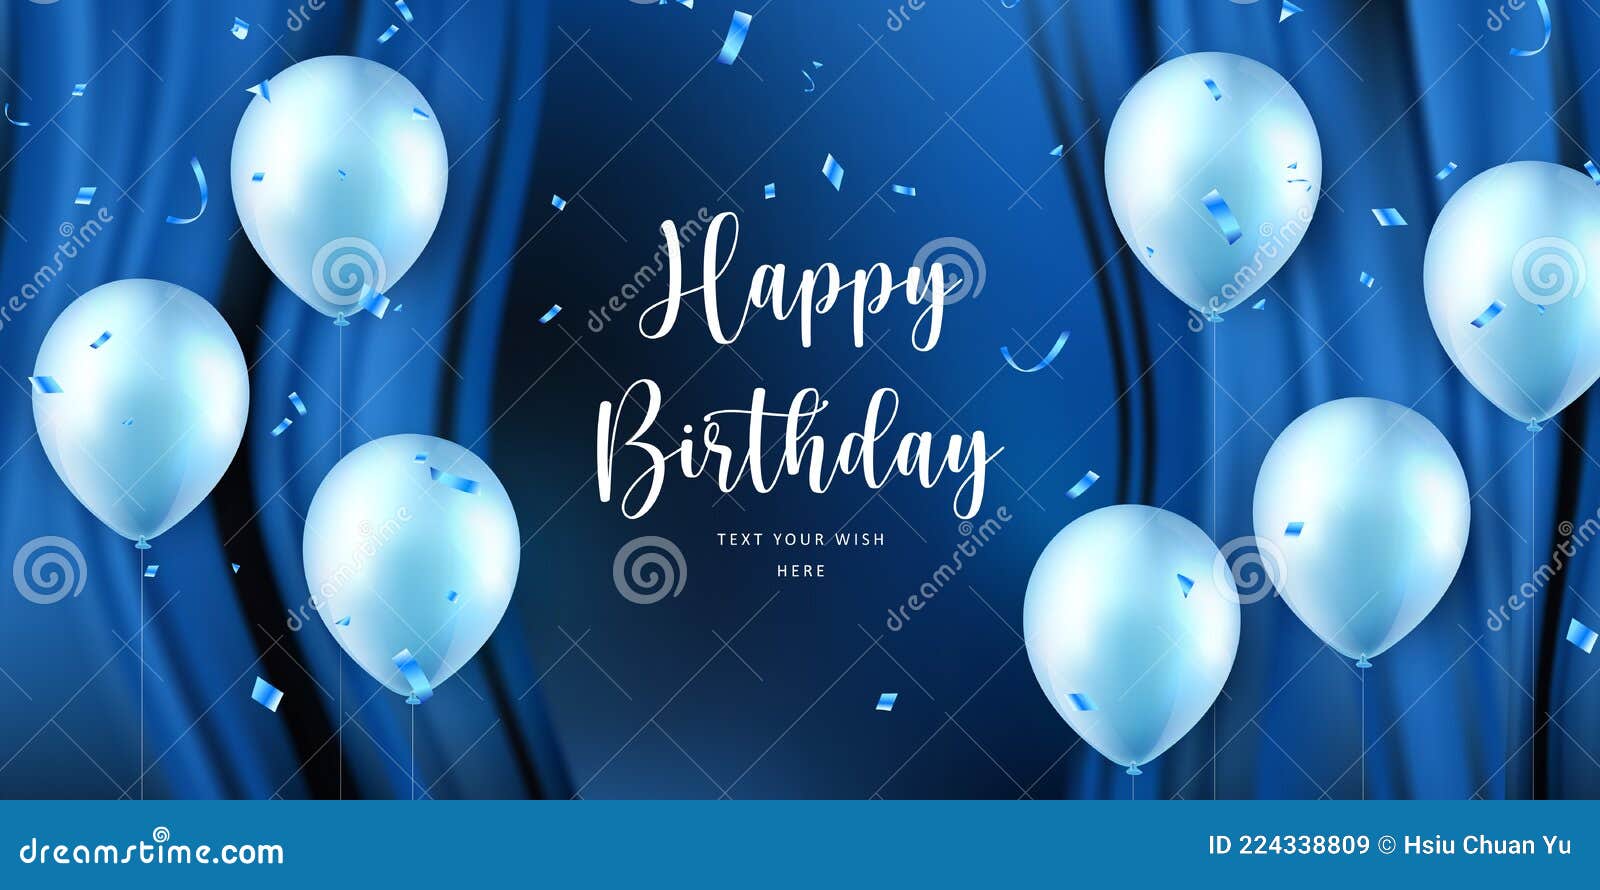 Elegant Blue Ballon and Silk Curtain Background Happy Birthday Celebration  Card Banner Template Stock Vector - Illustration of blue, template:  224338809